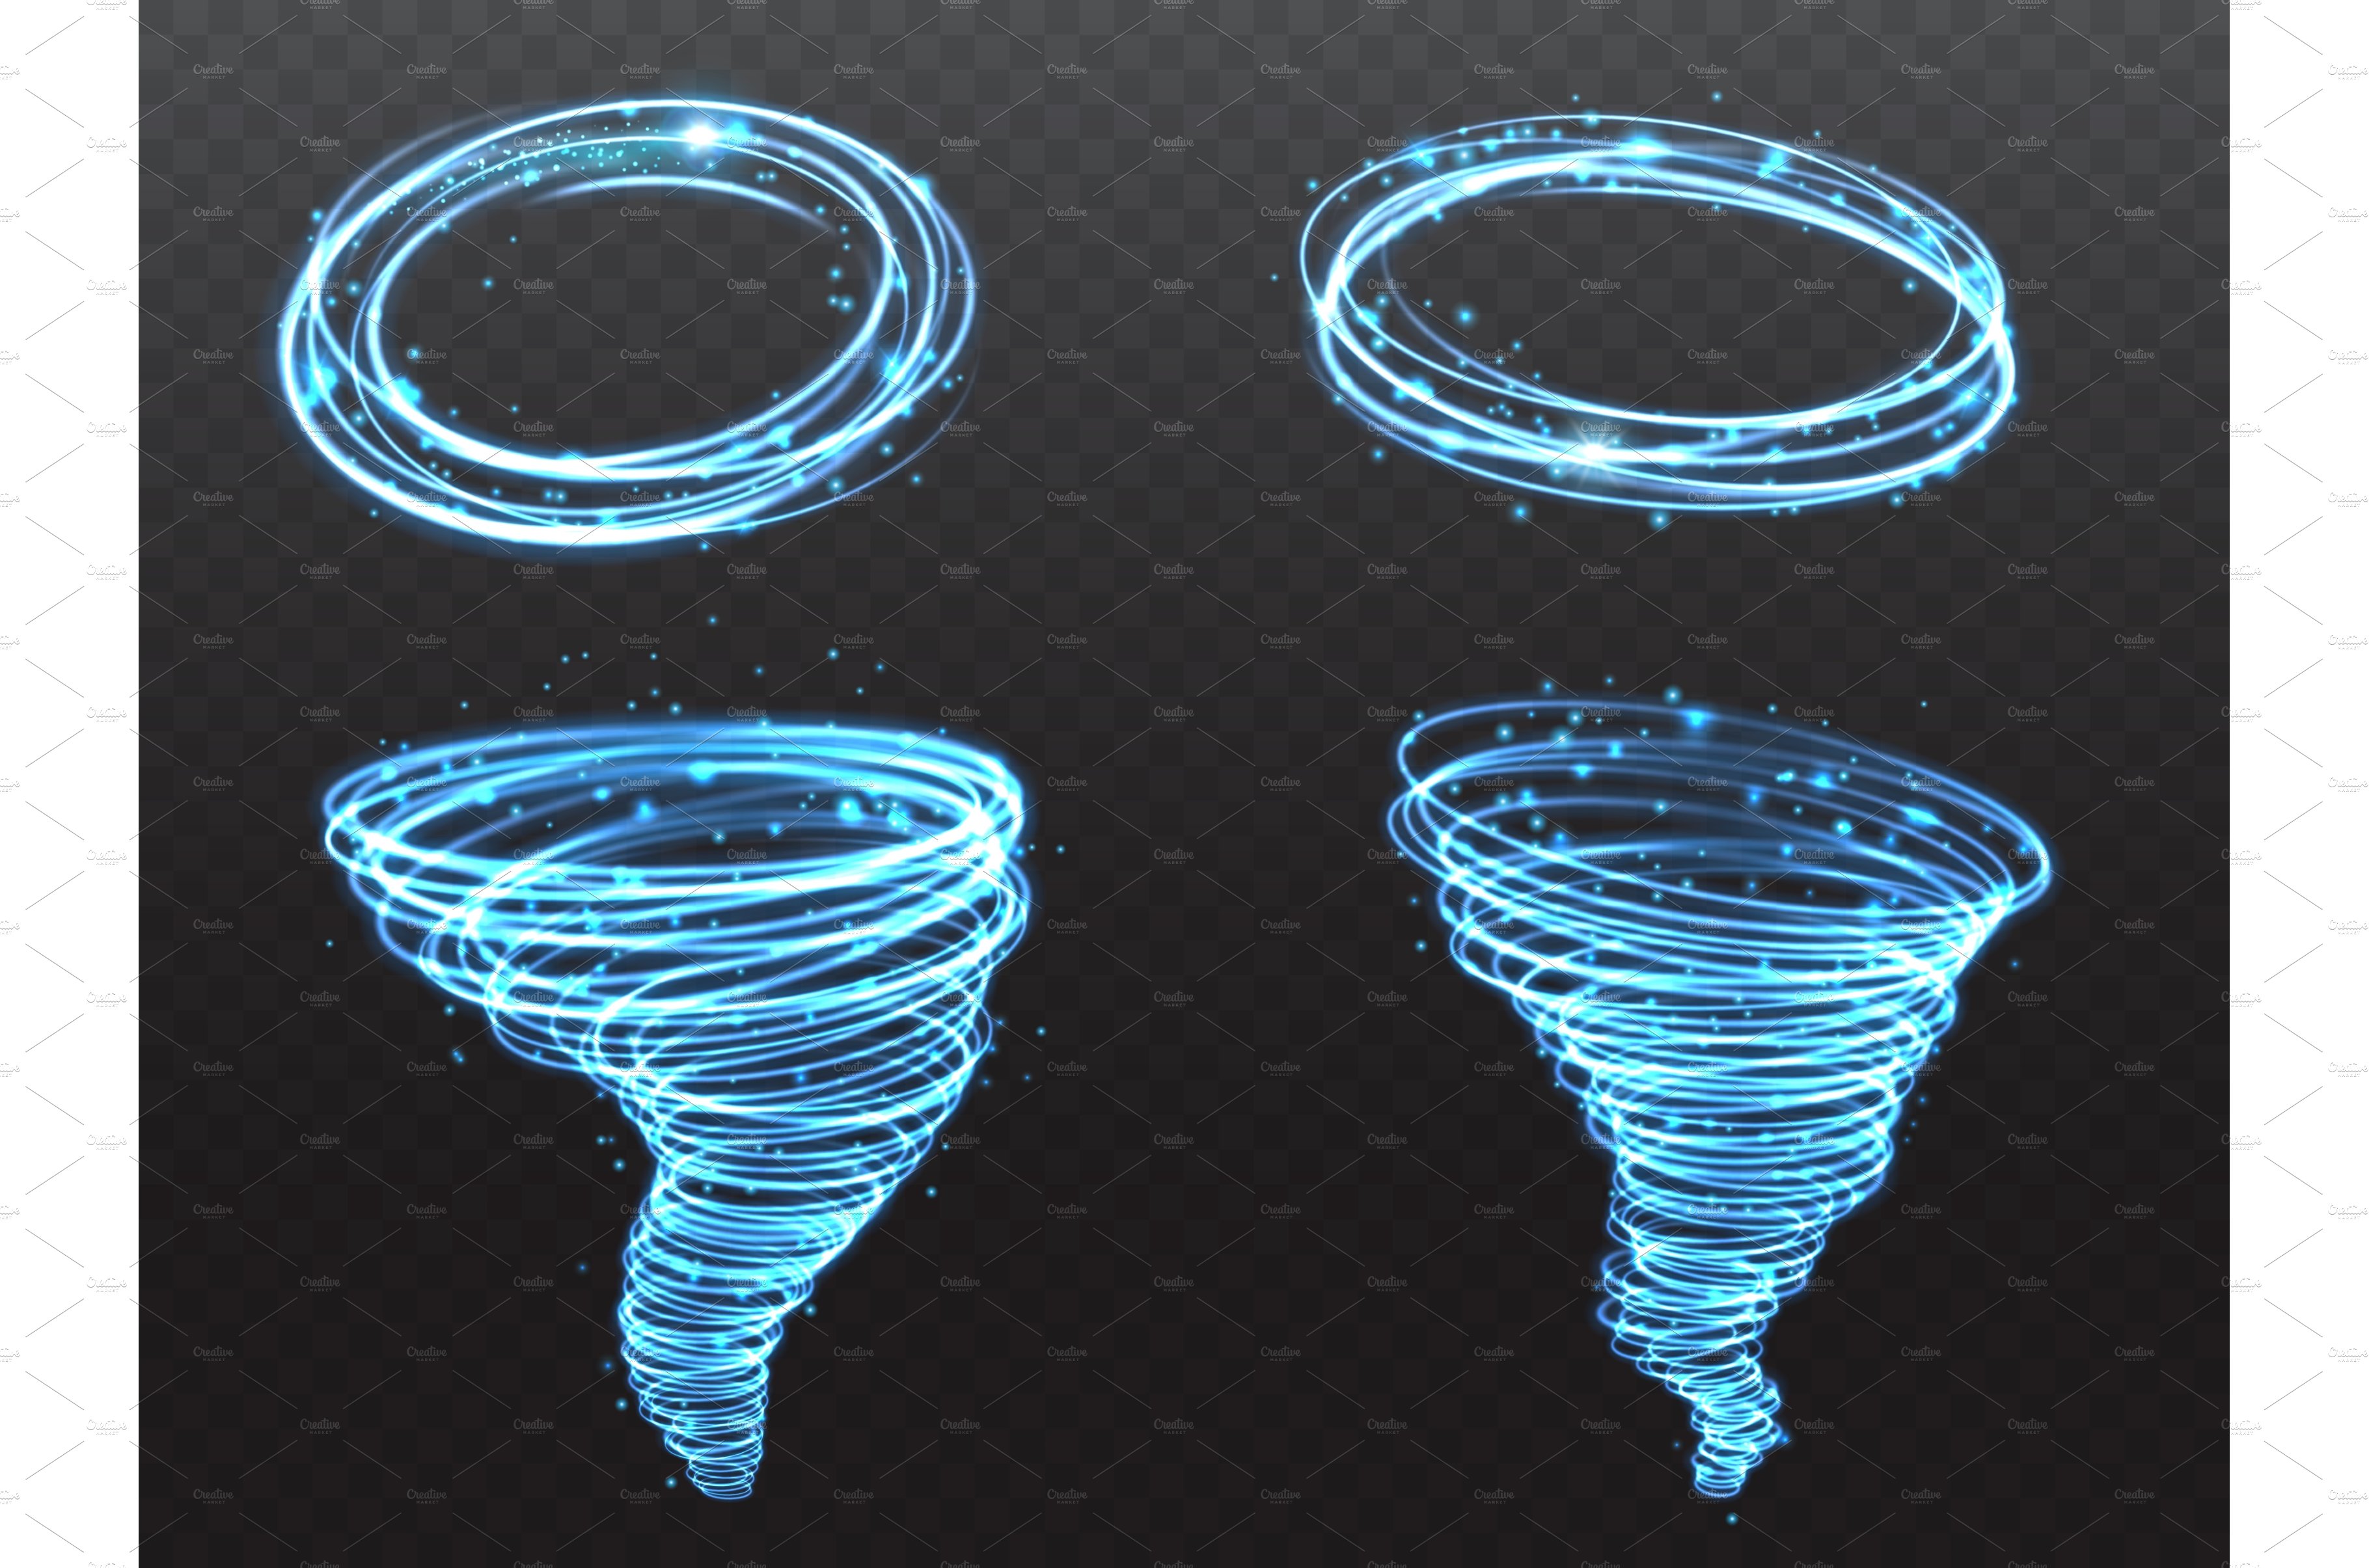 Light tornado, glitter particles cover image.